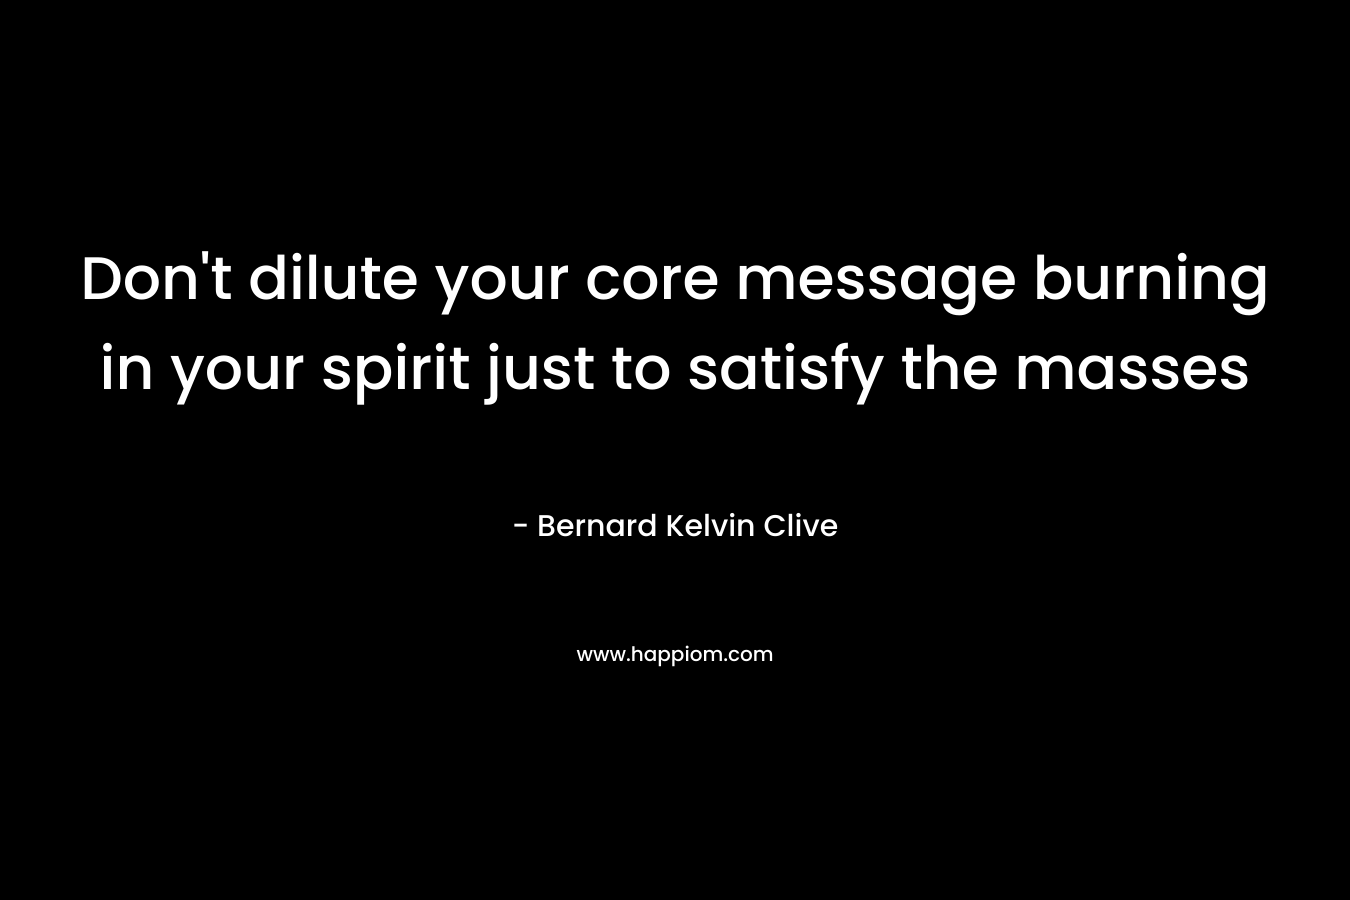 Don’t dilute your core message burning in your spirit just to satisfy the masses – Bernard Kelvin Clive